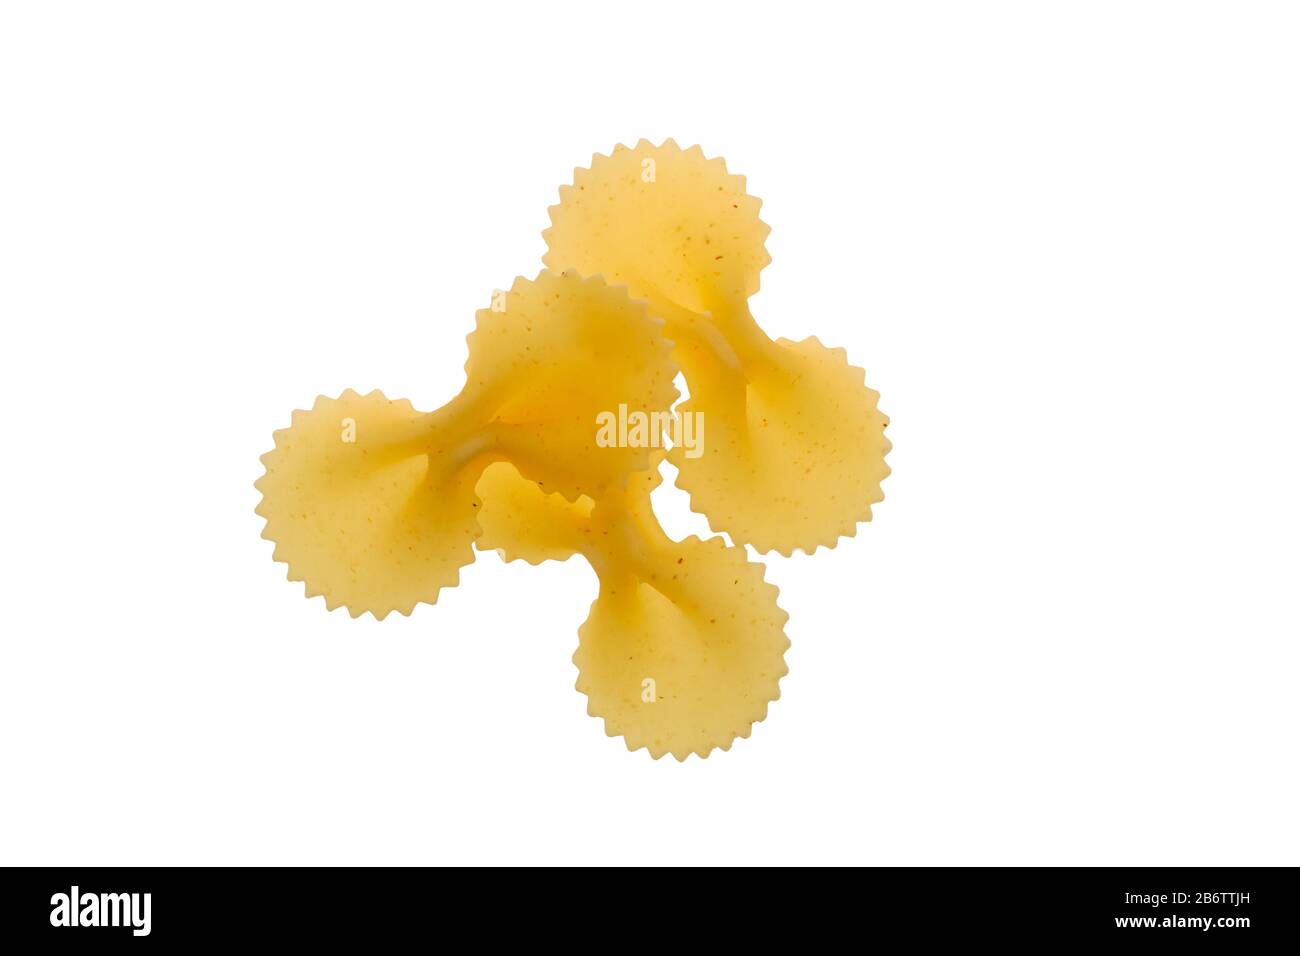 Top view of farfalle - bow tie pasta isolated on white Stock Photo